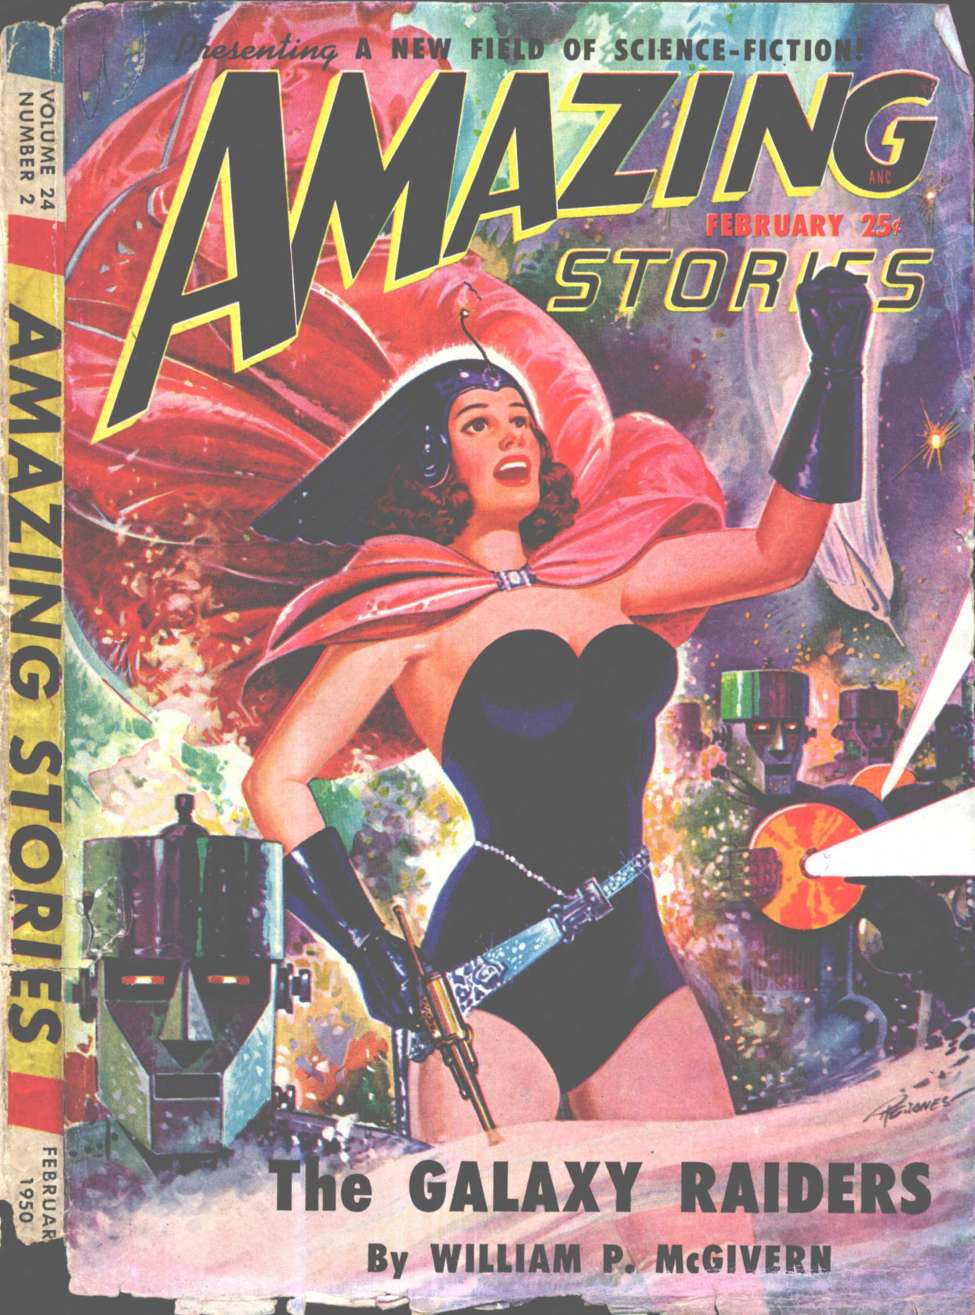 Book Cover For Amazing Stories v24 2 - The Galaxy Raiders - William P. McGivern